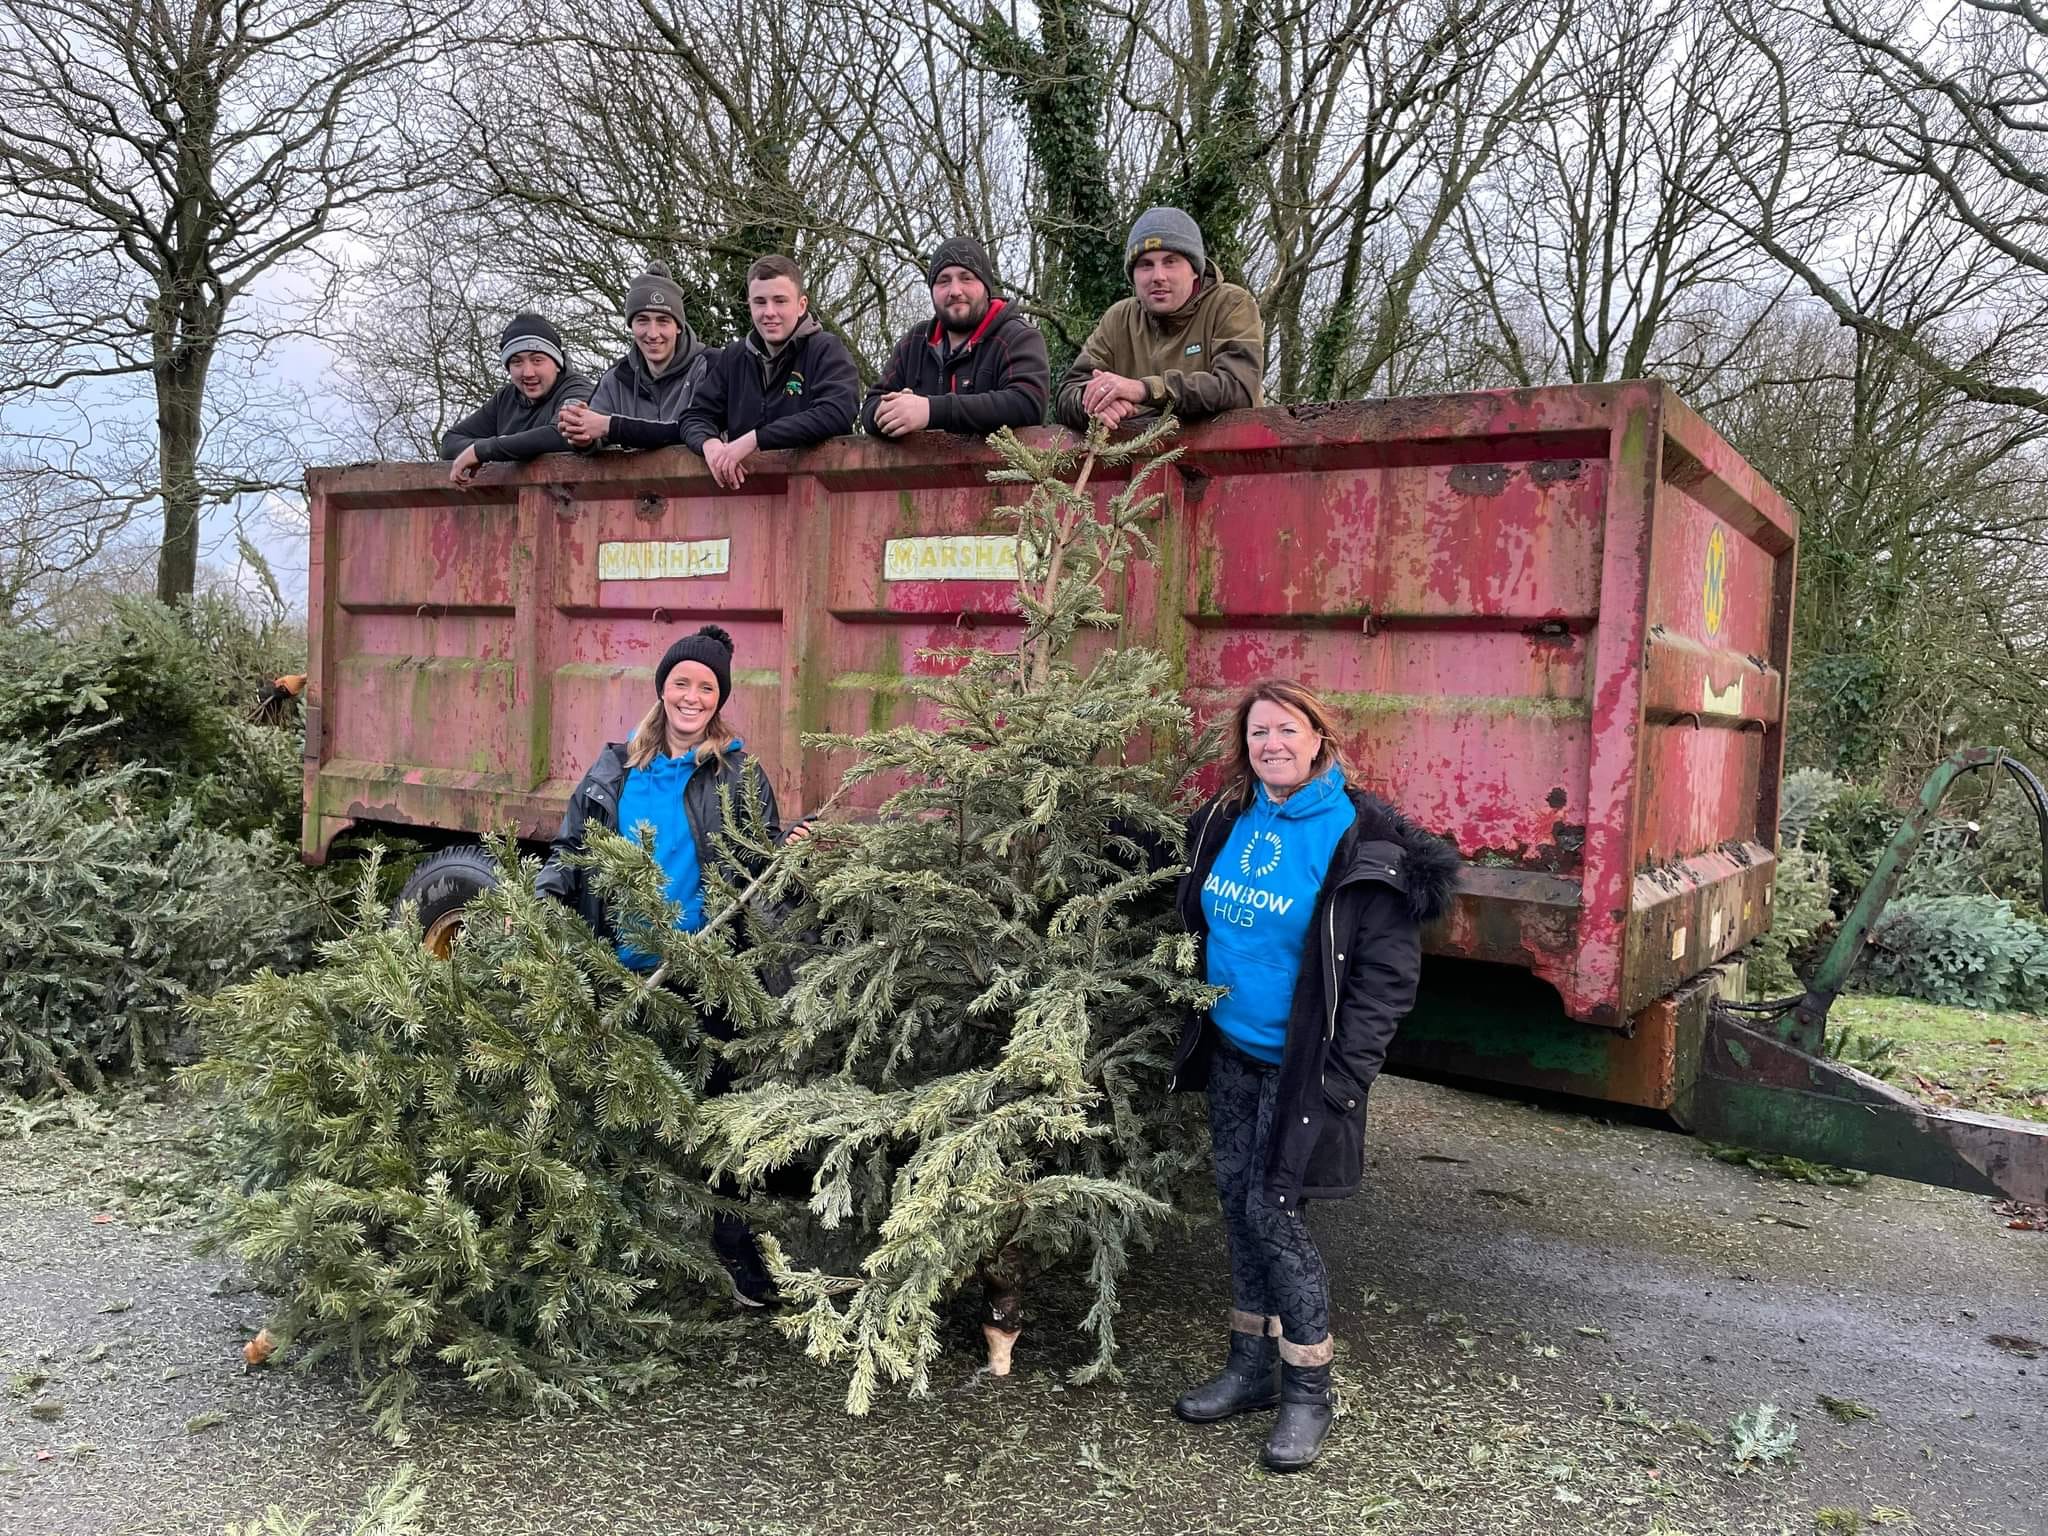 “Recycle your Christmas Tree” service raised £5,500